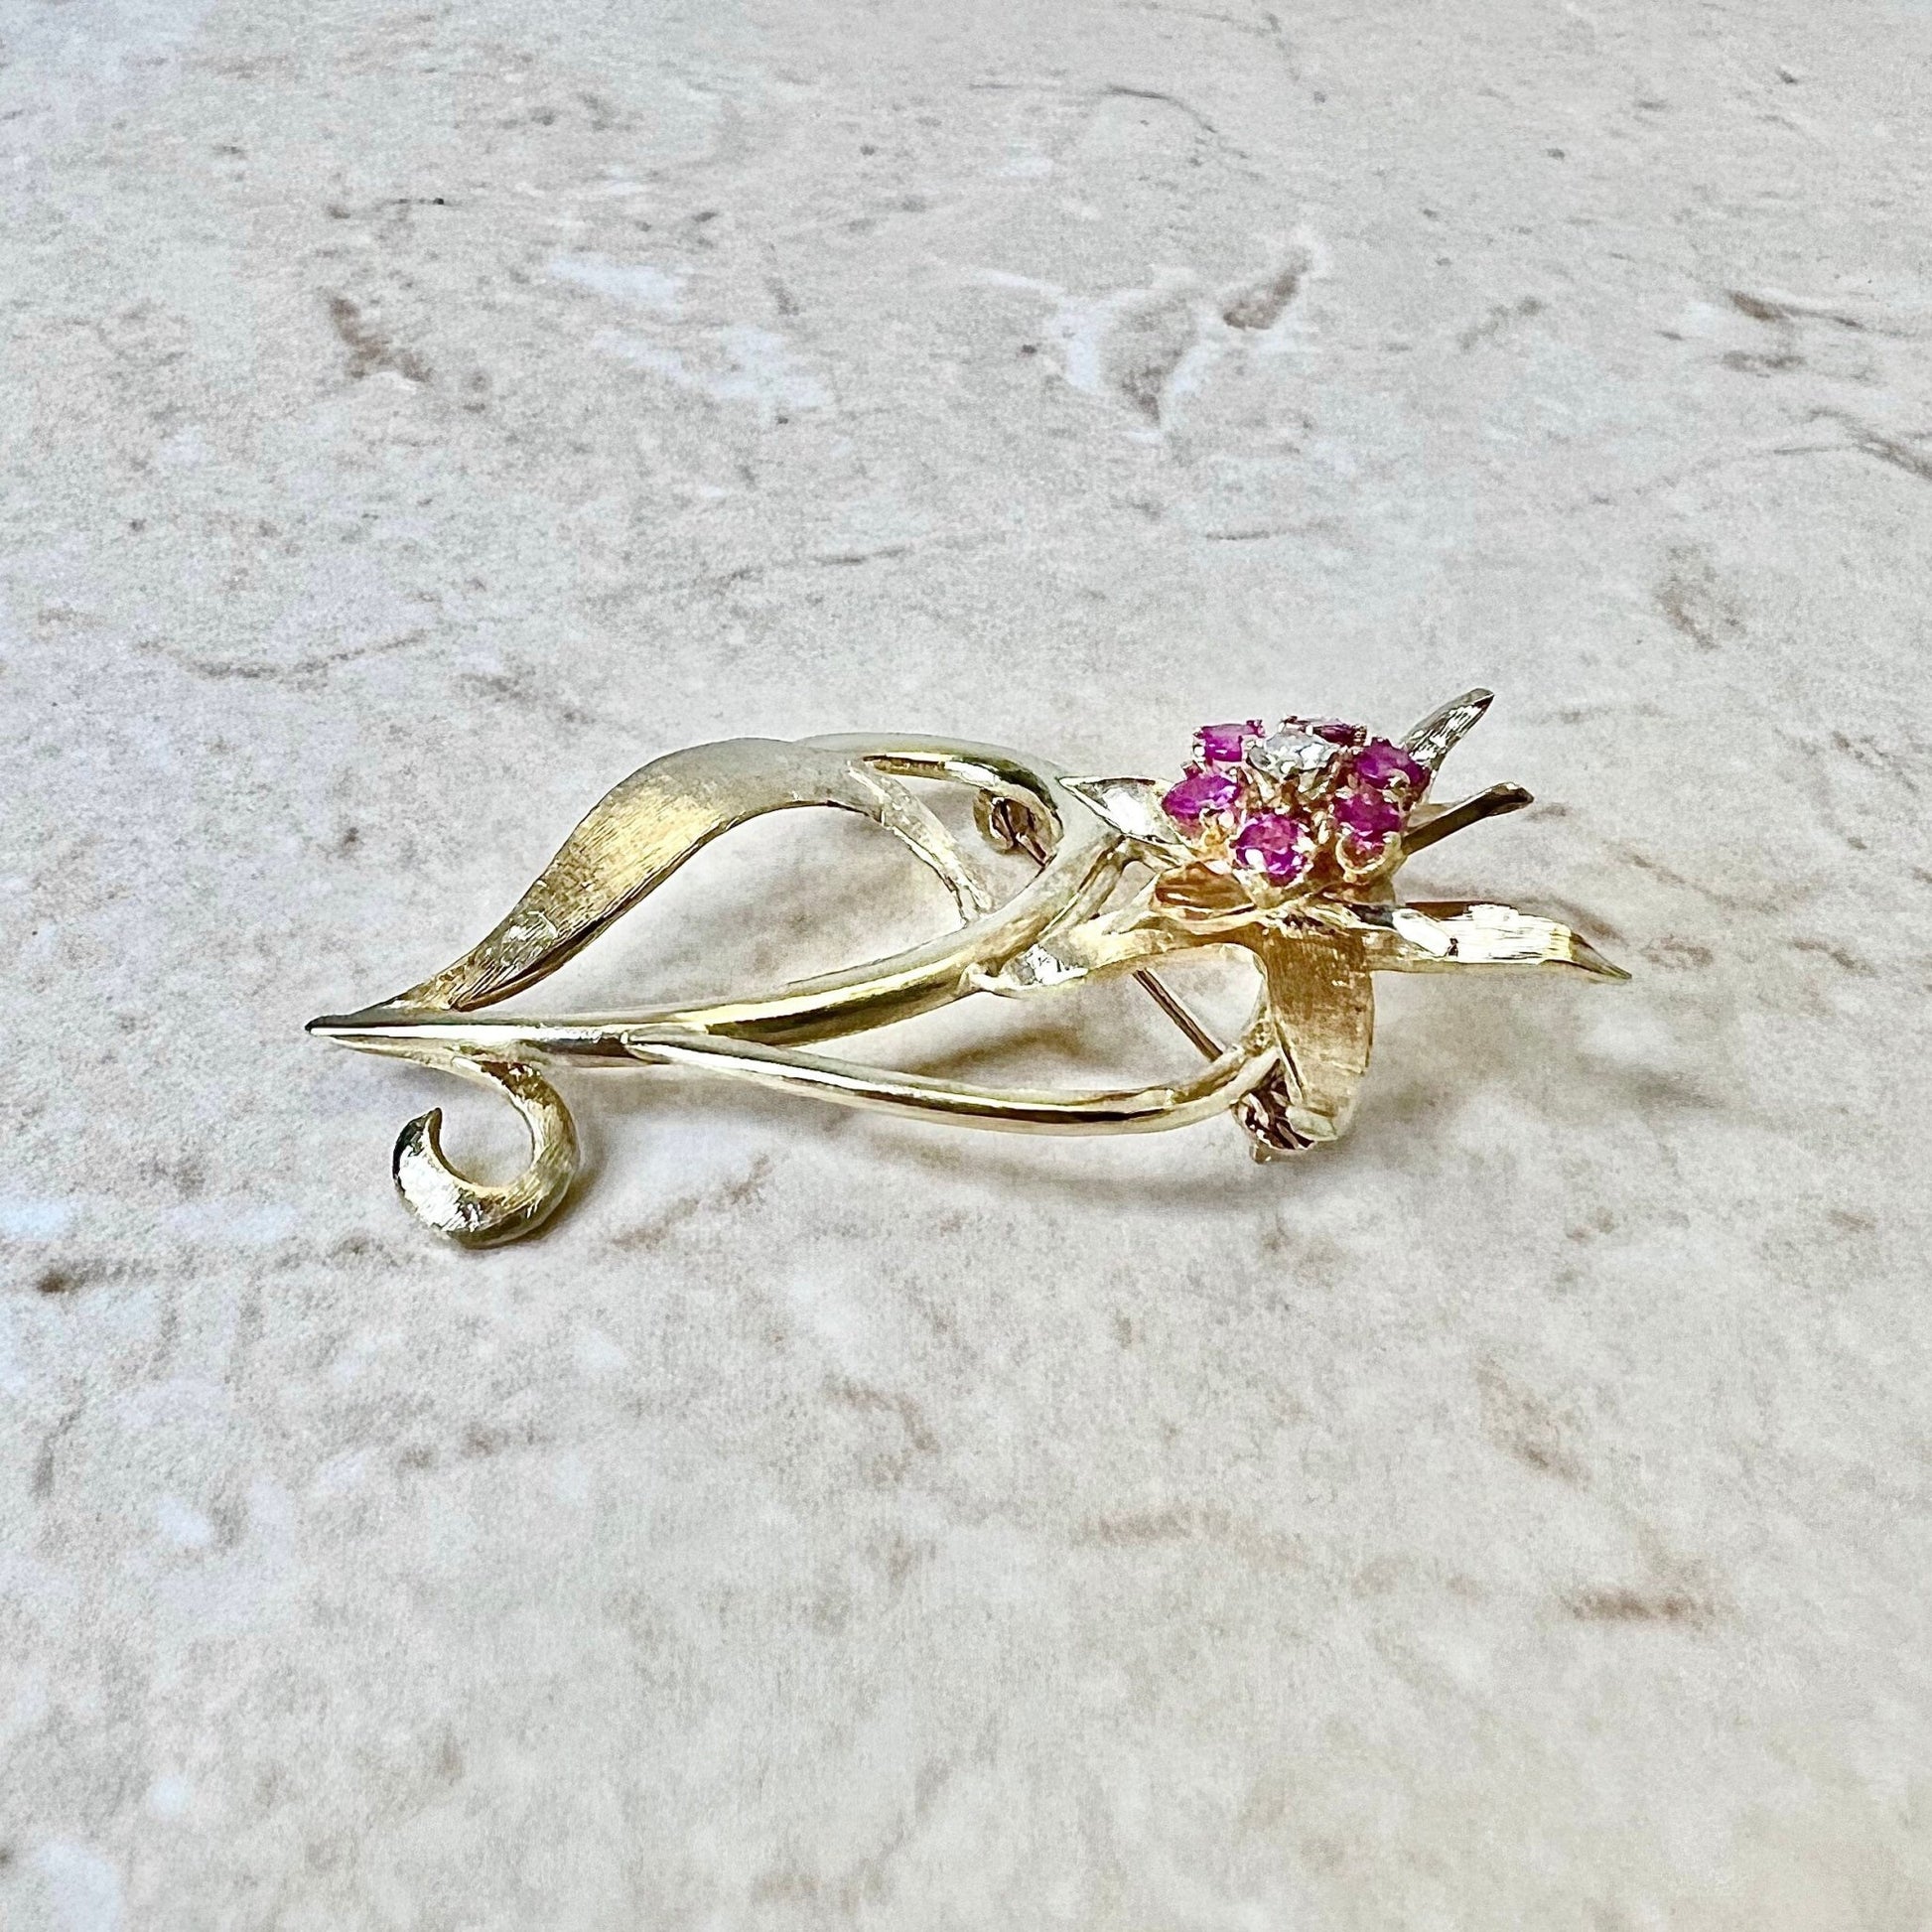 Vintage 1960’s 14K Diamond & Ruby Brooch - Yellow Gold Heart/Flower Brooch - Gold Ruby Pin - July Birthstone - Valentine’s Gift For Her